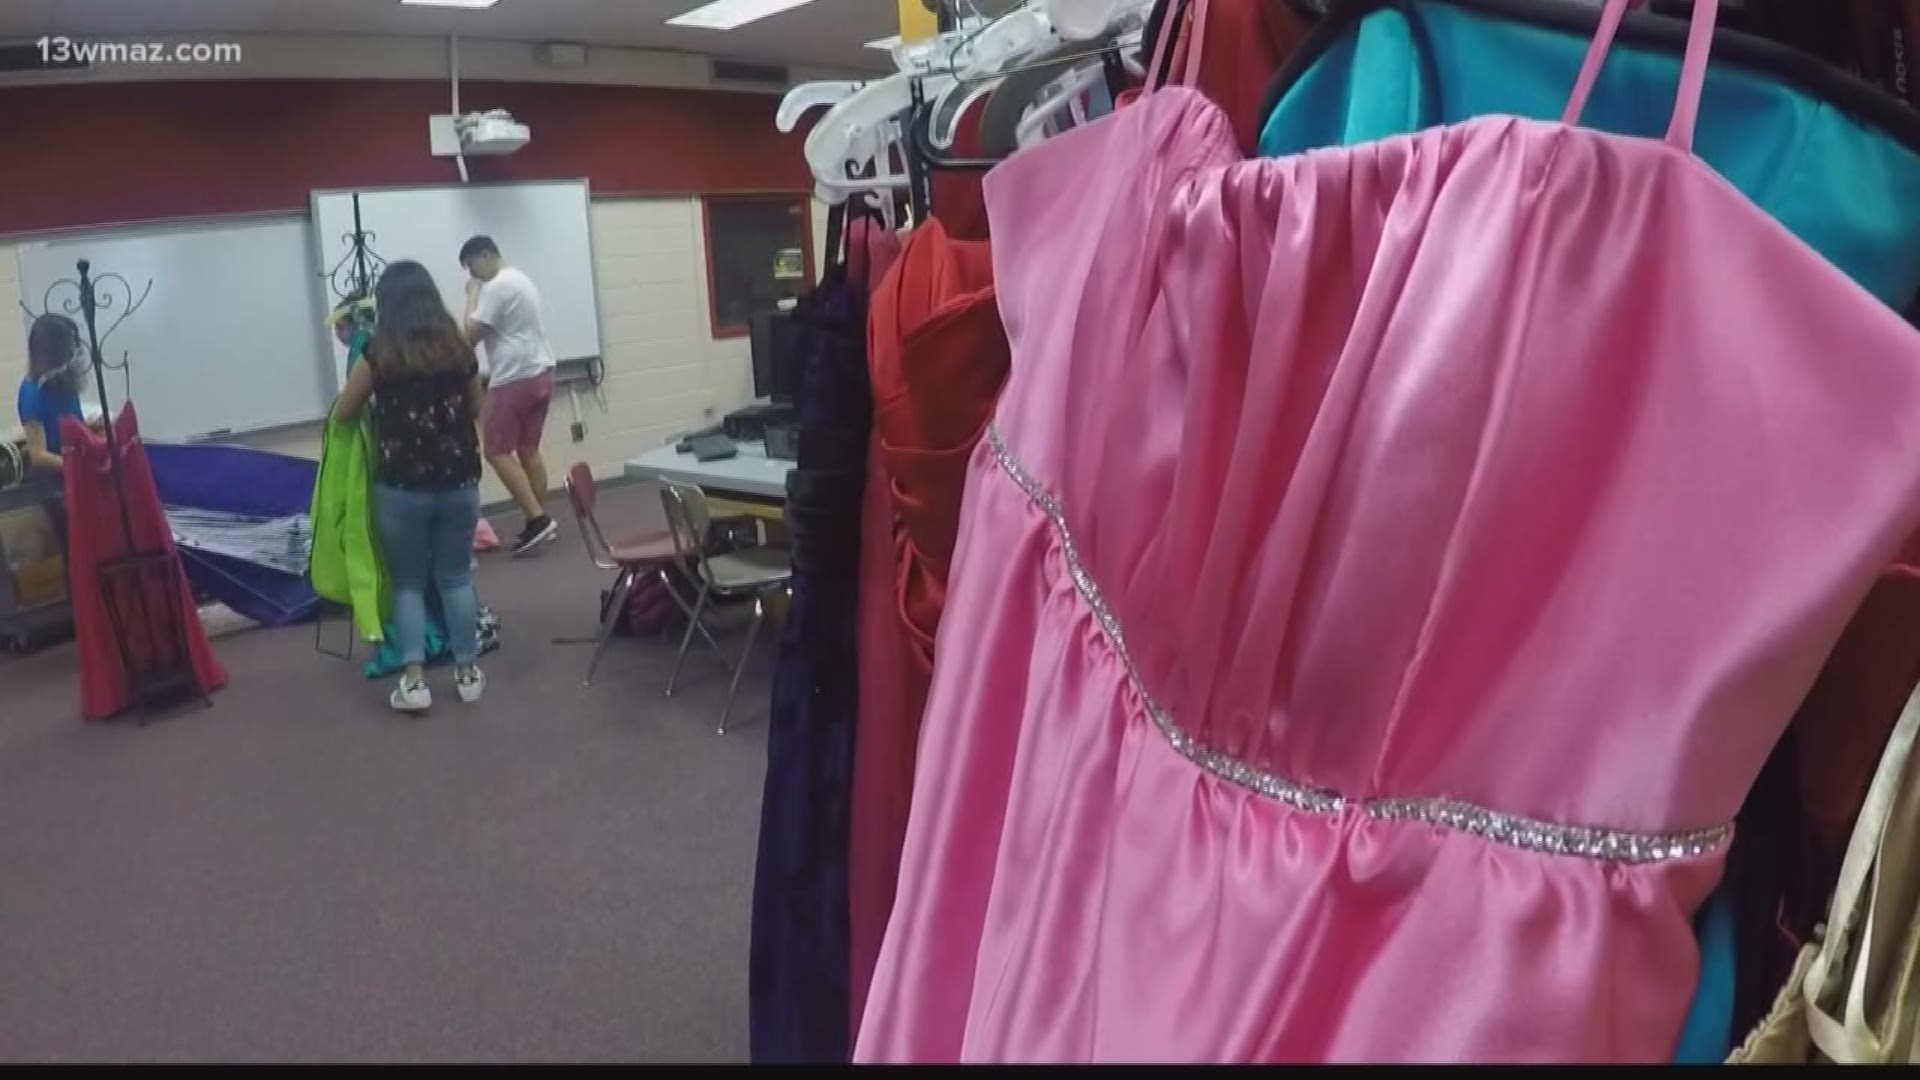 School selling discounted homecoming dresses